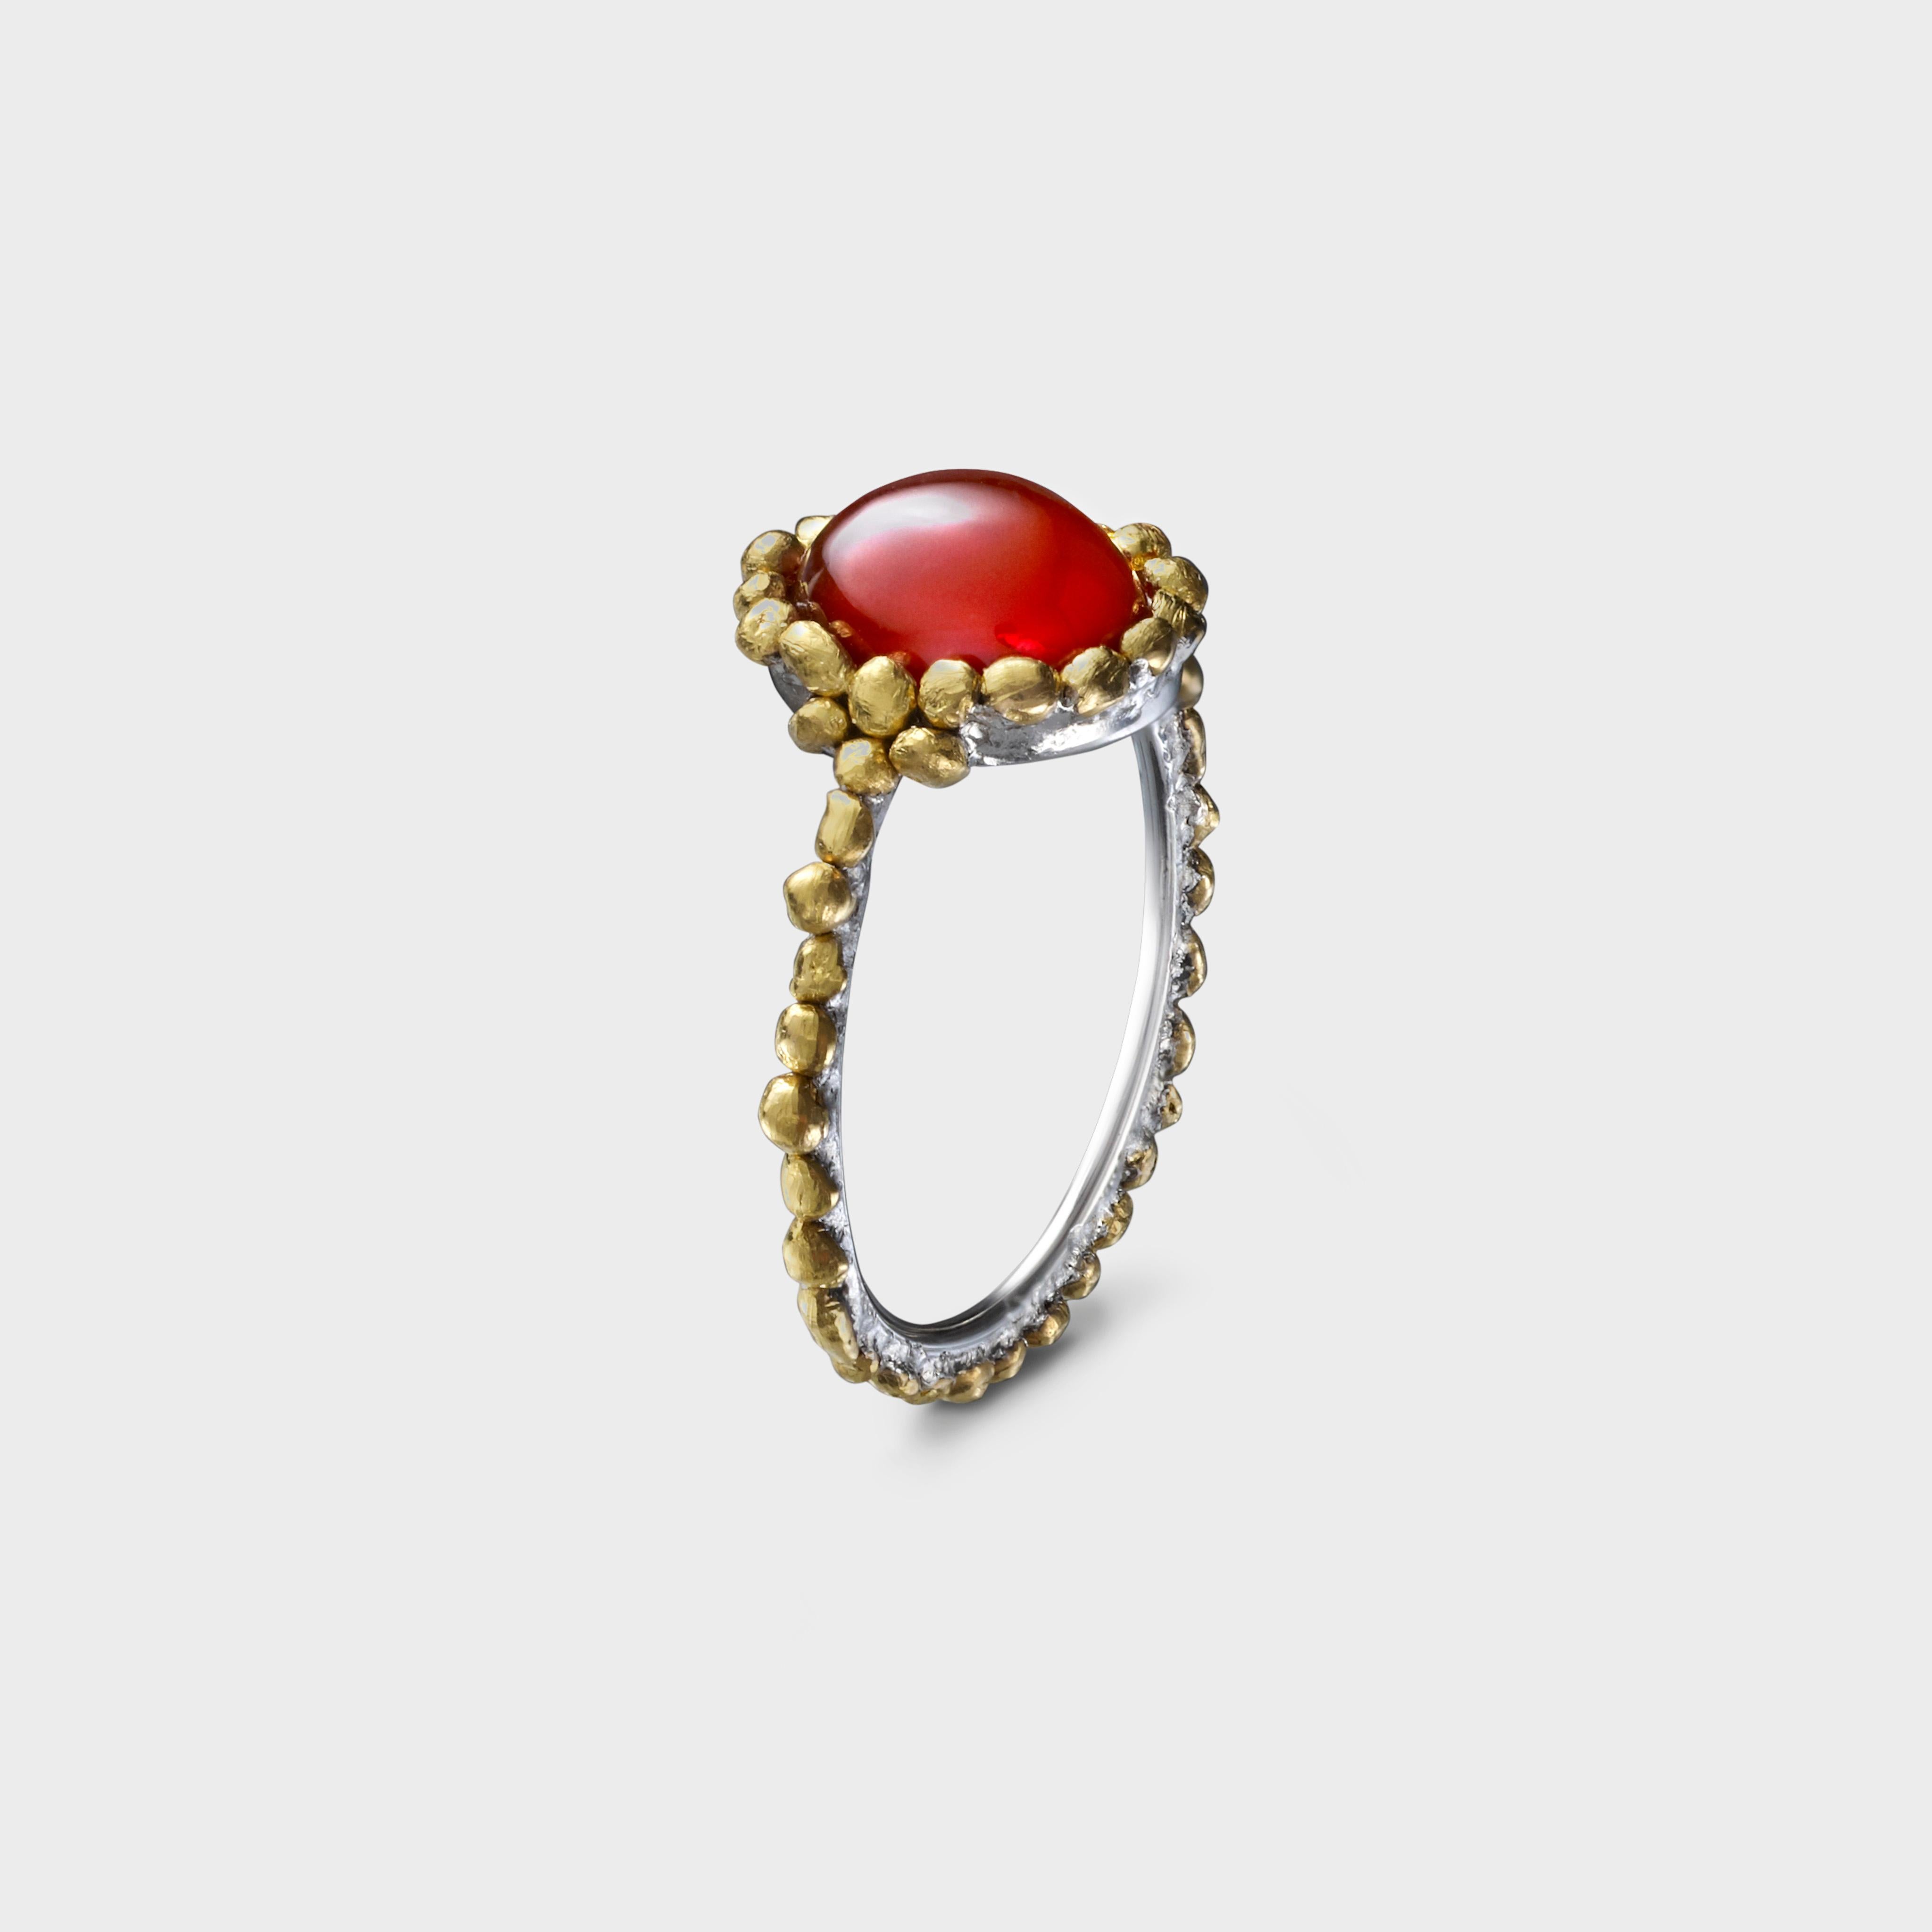 A beautiful reddish fire opal that perfectly compliments the sun rays of the 24 karat gold pebbles on the halo around it; bold and fun.  The pure gold pebbles are nestled securely into a platinum platform.   Part of a playful collection inspired by